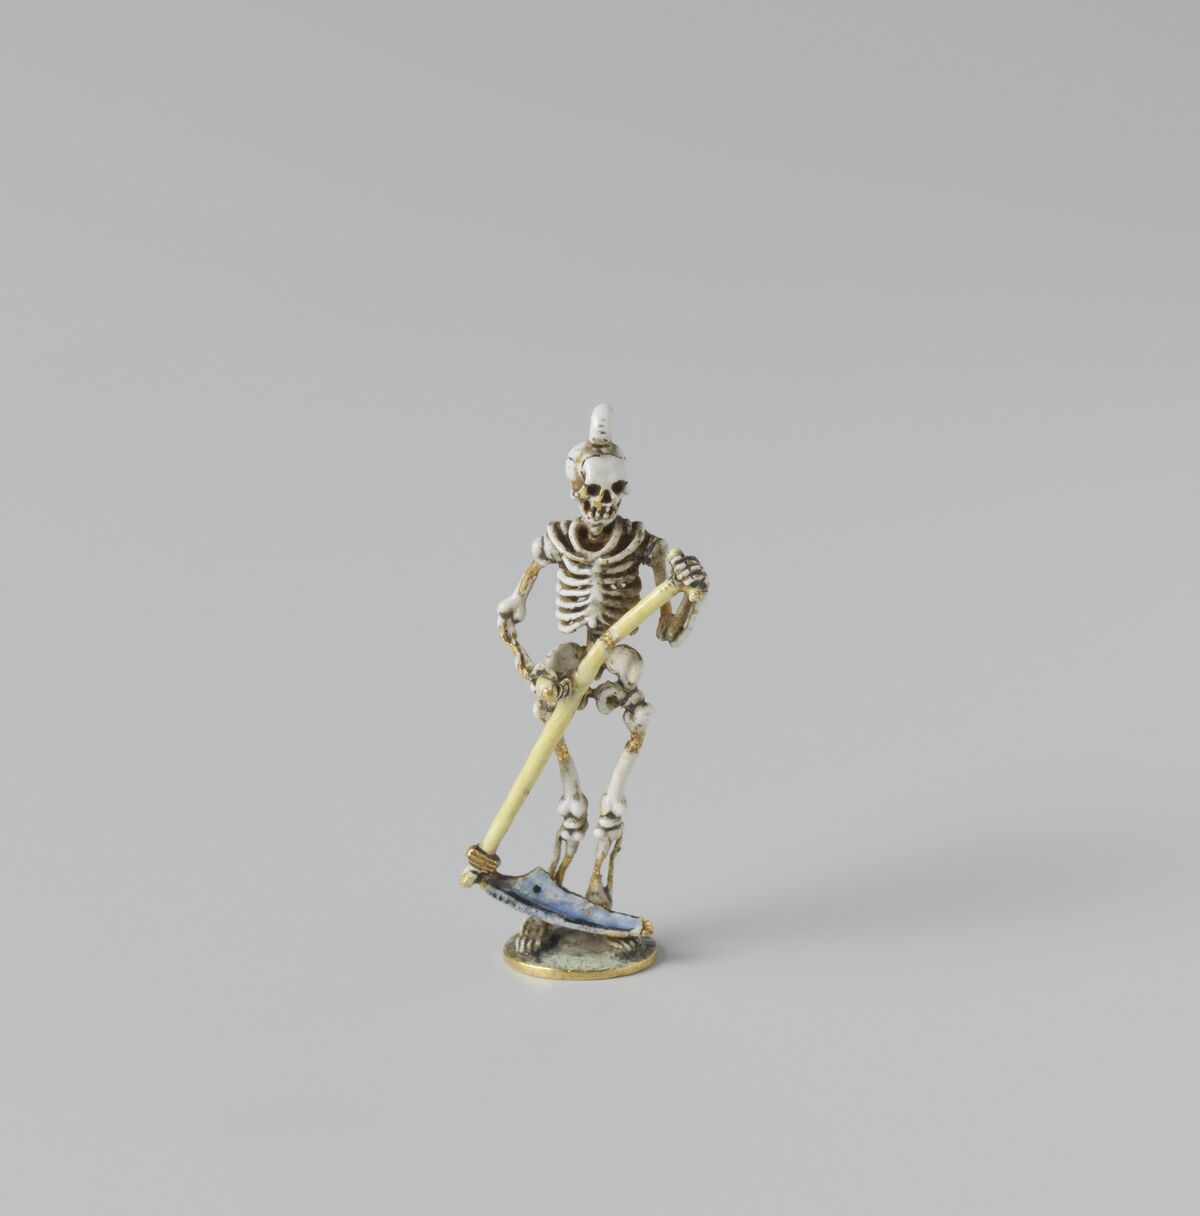 Pendant in the shape of Death, ca. 1600. Courtesy of the Rijksmuseum.